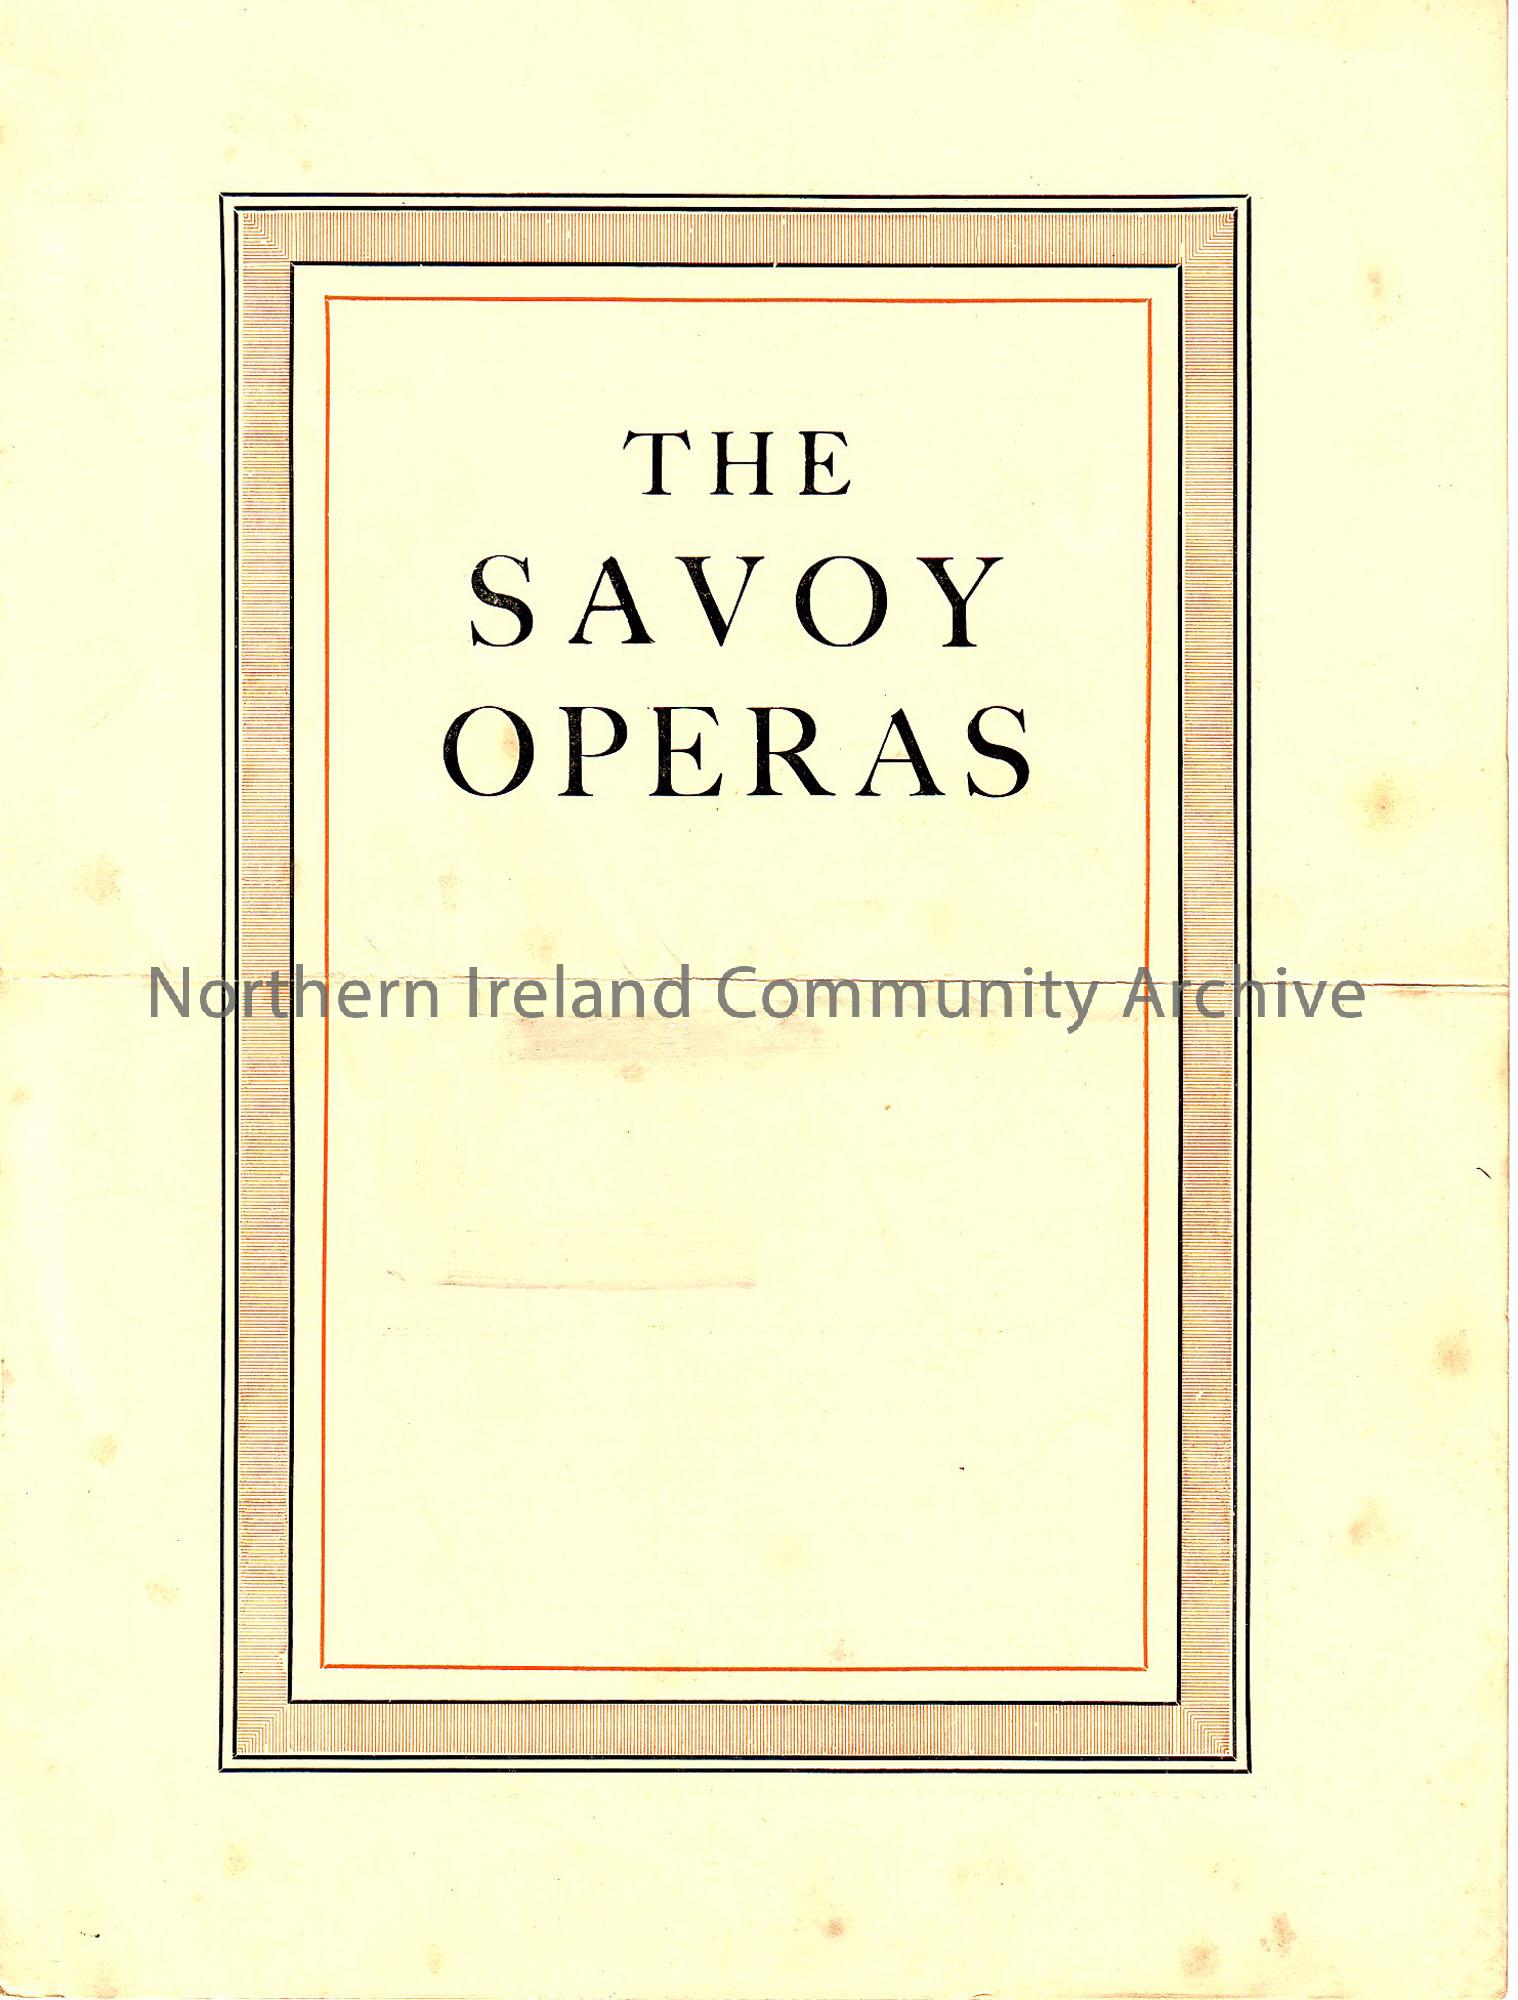 The Savoy Operas advertisement for amateurs to join up to perform in any of the musical pieces listed. Applications were to be to R.D’Oyly Carte, Savo…